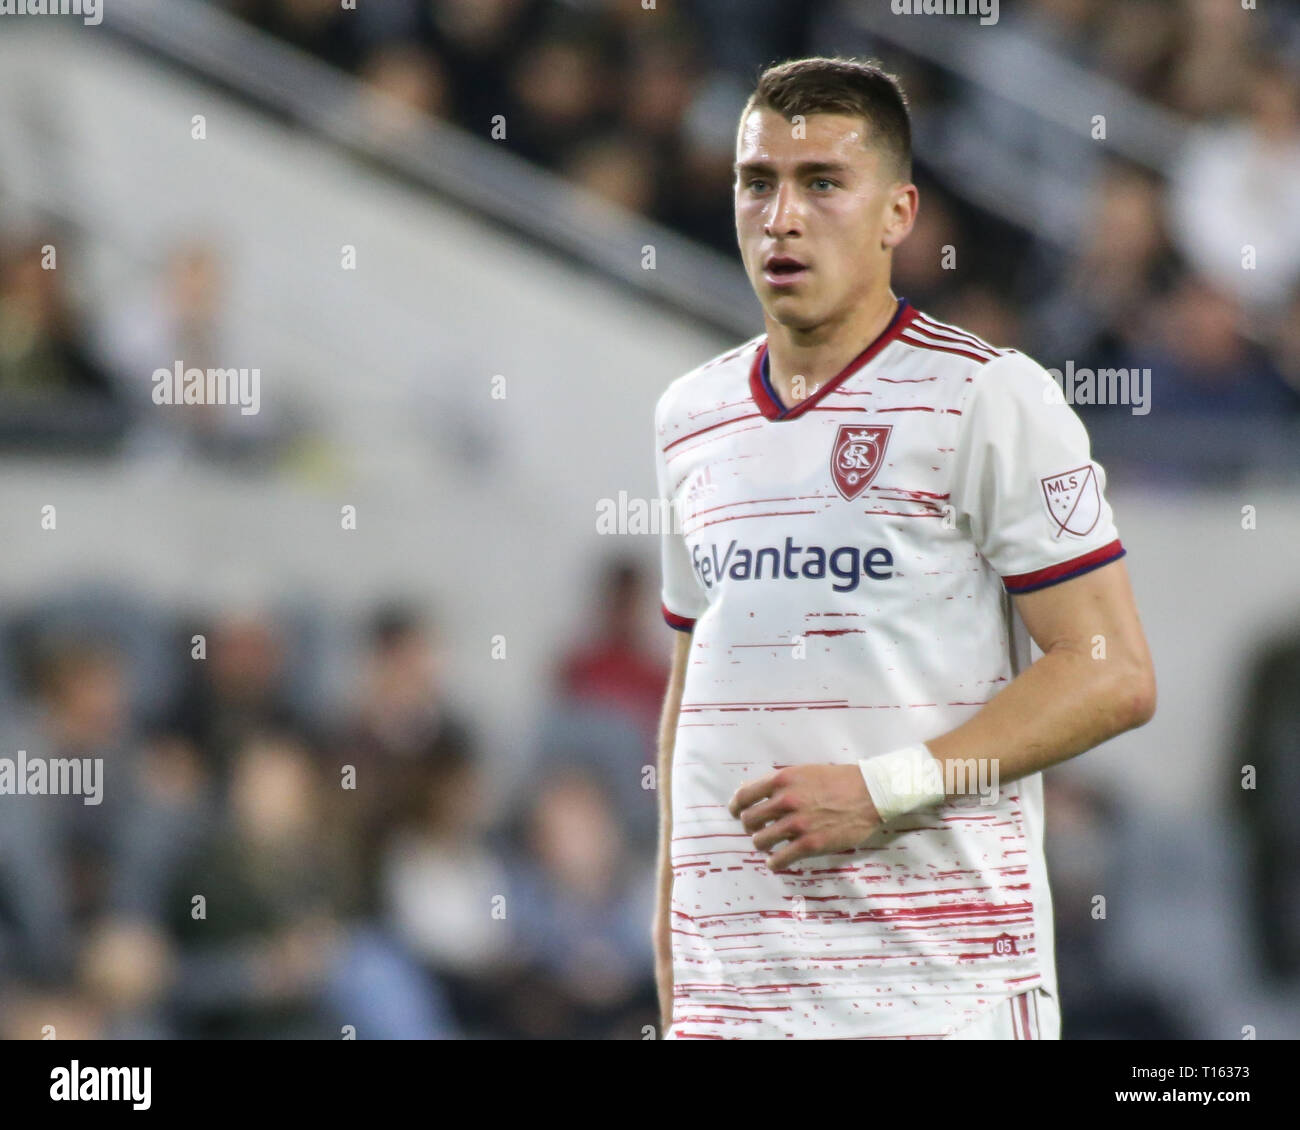 Los Angeles, CA, USA. 23rd Mar, 2019. Real Salt Lake forward Tate Schmitt (21) during the Los Angeles Football Club vs Real Salt Lake at BANC OF CALIFORNIA Stadium in Los Angeles, Ca on March 23, 2019. Jevone Moore Credit: csm/Alamy Live News Stock Photo